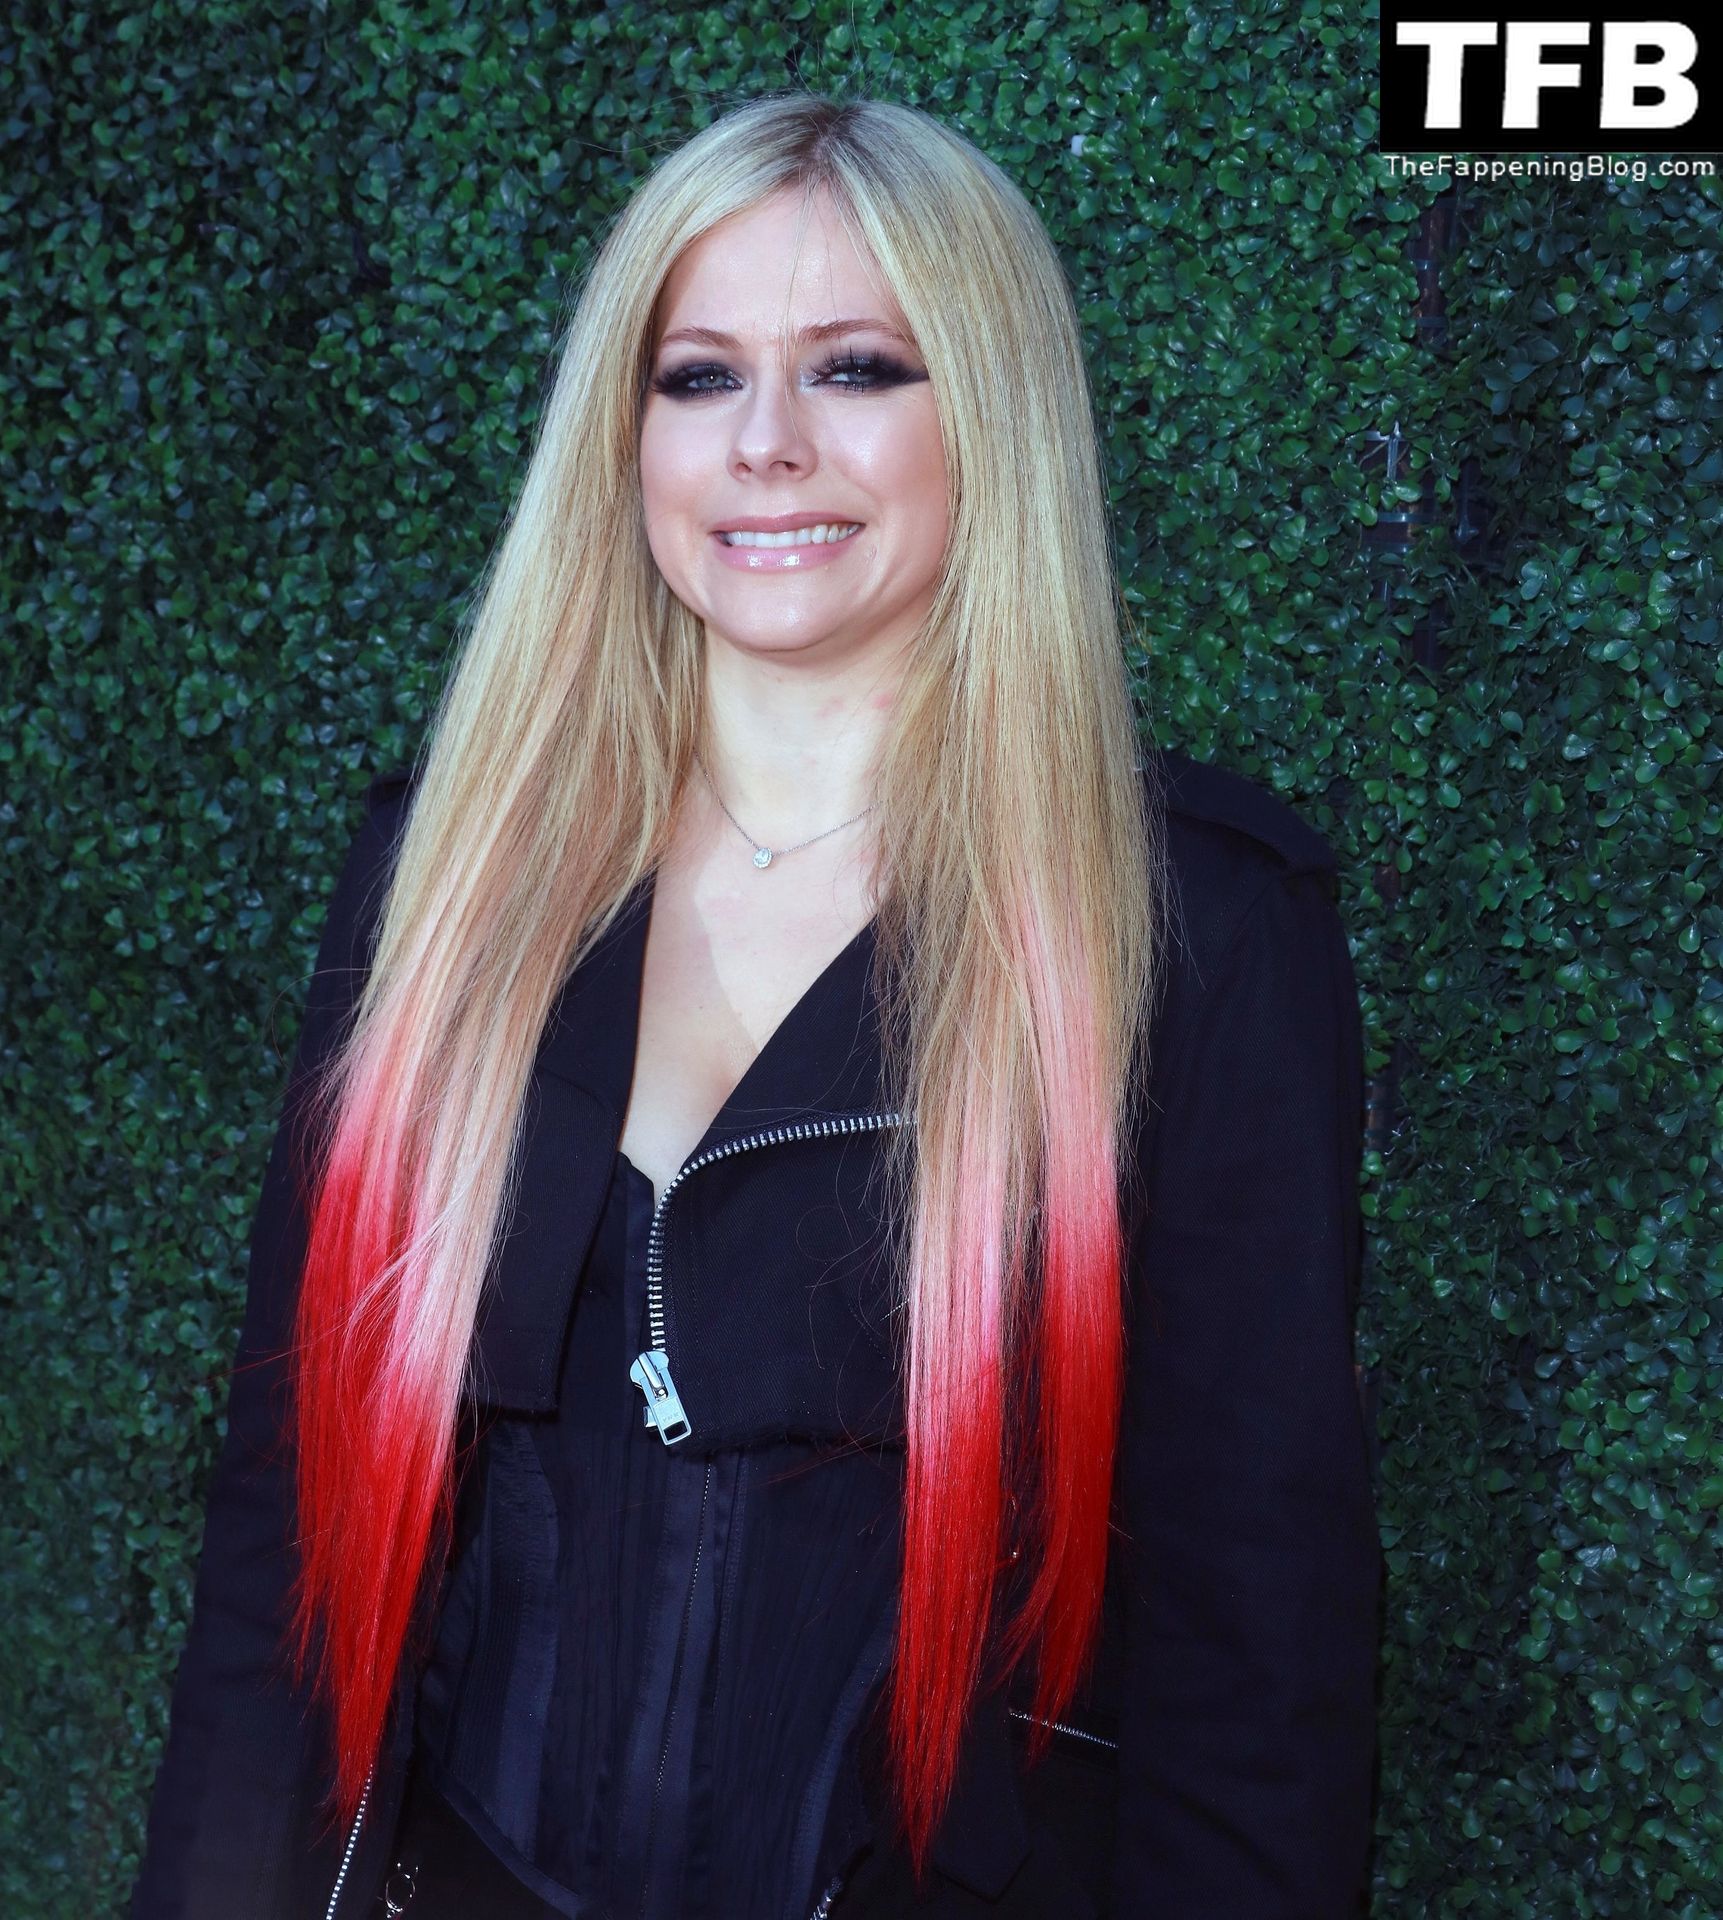 Avril-Lavigne-Sexy-The-Fappening-Blog-25.jpg